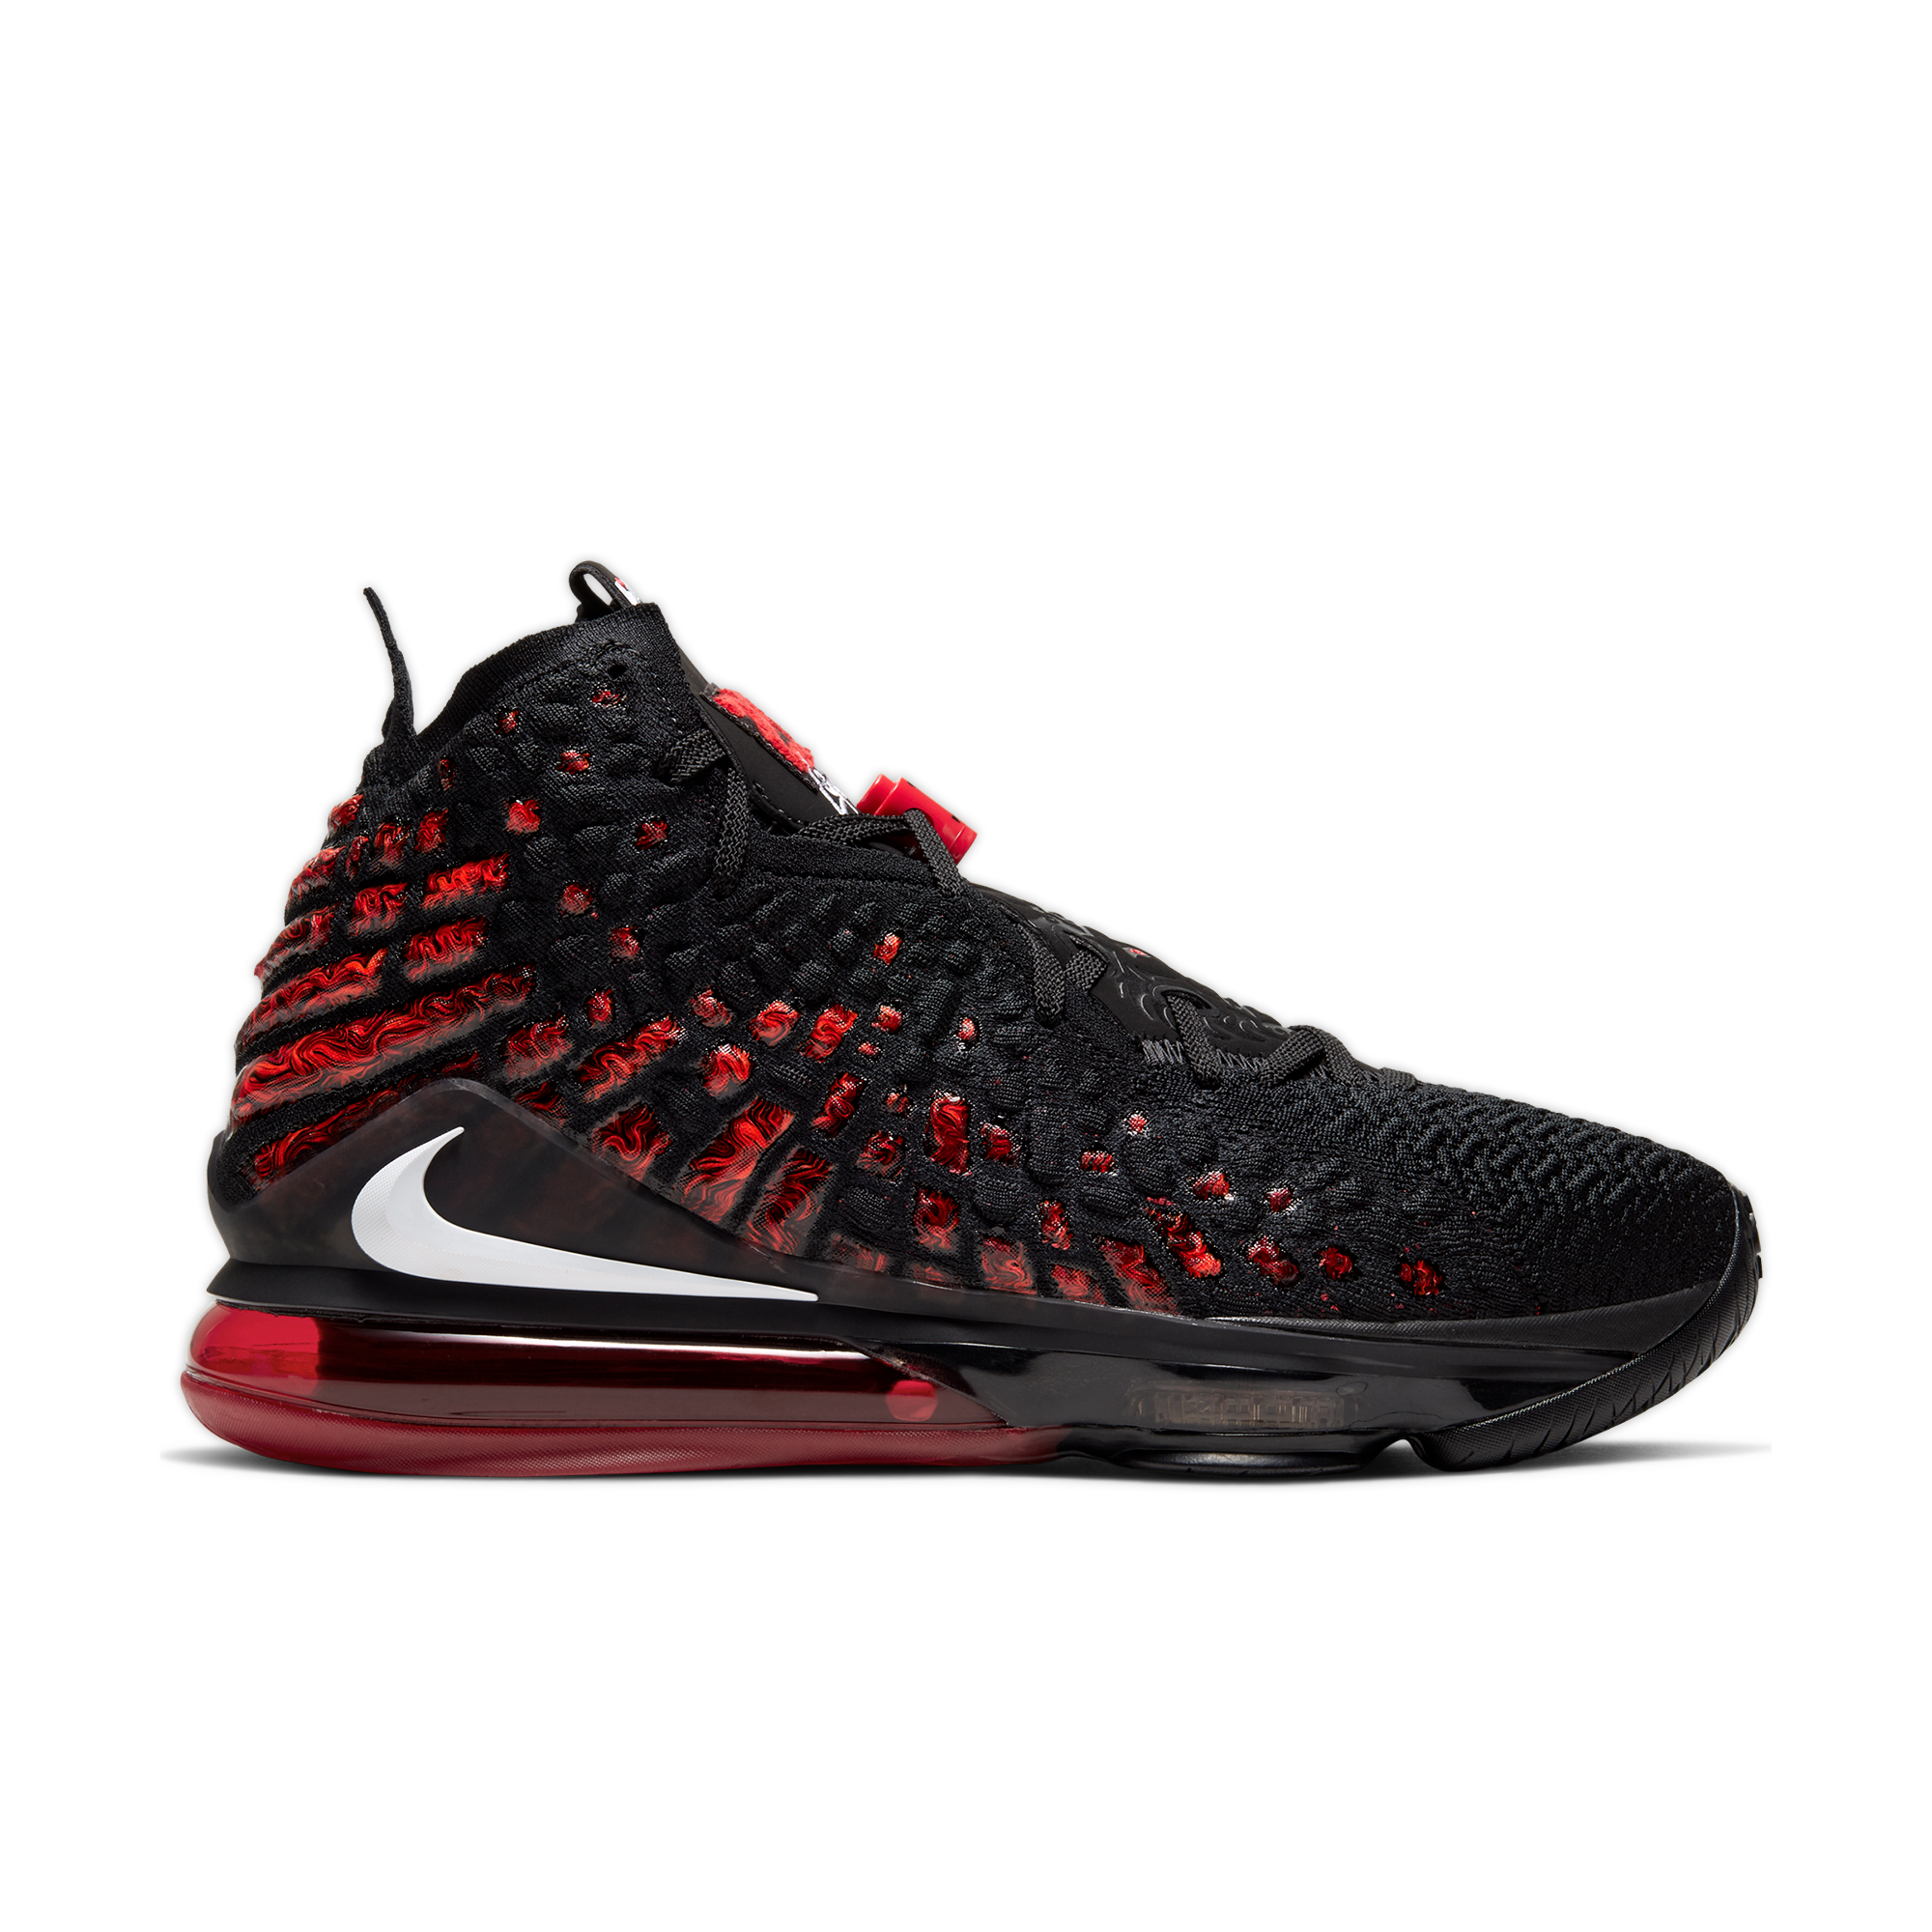 lebron james shoes all red